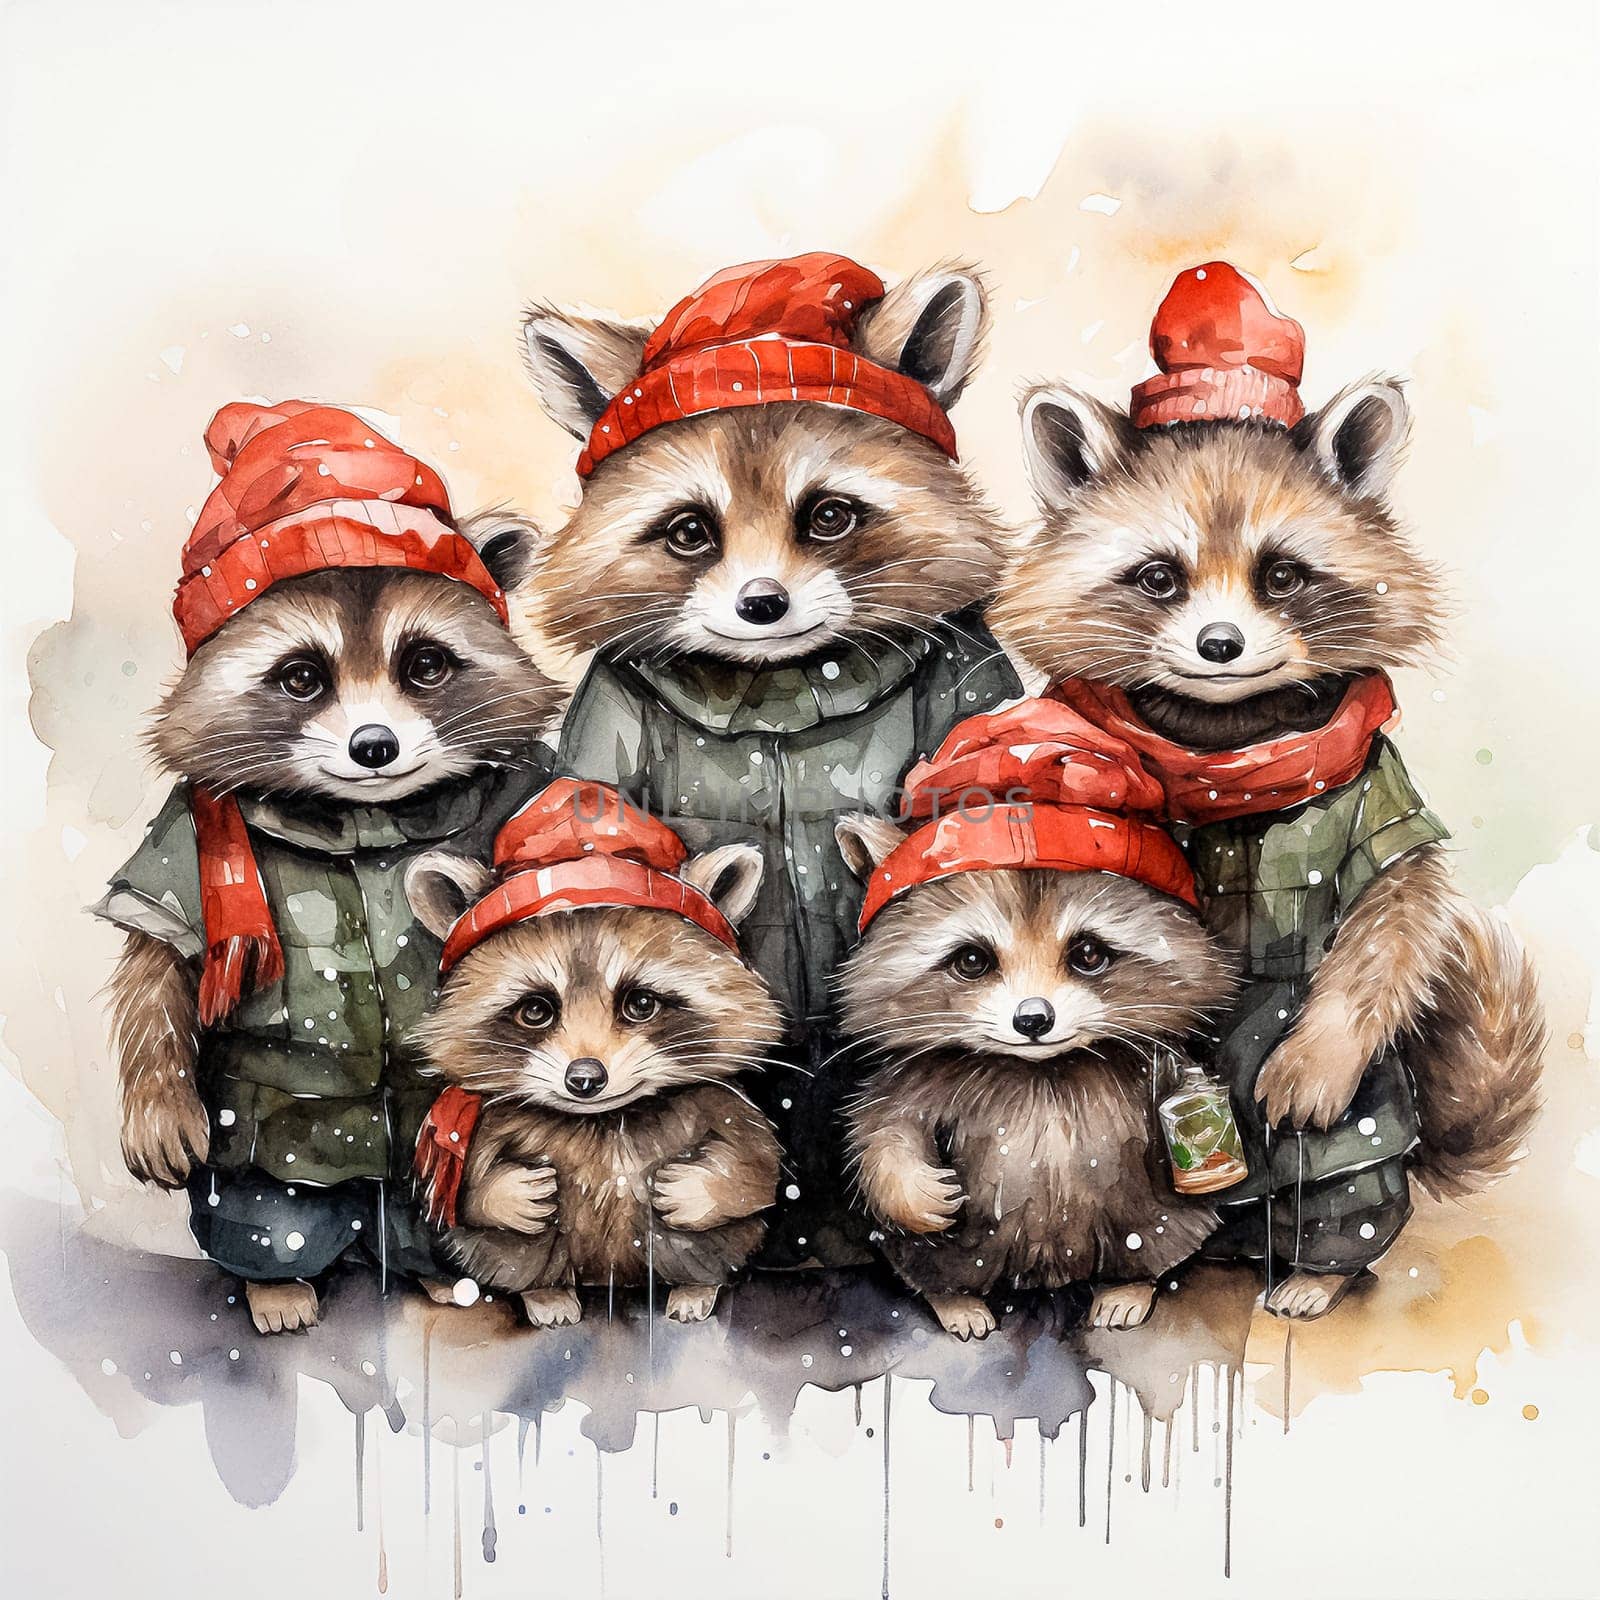 Family of raccoons in winter hats watercolor. High quality illustration